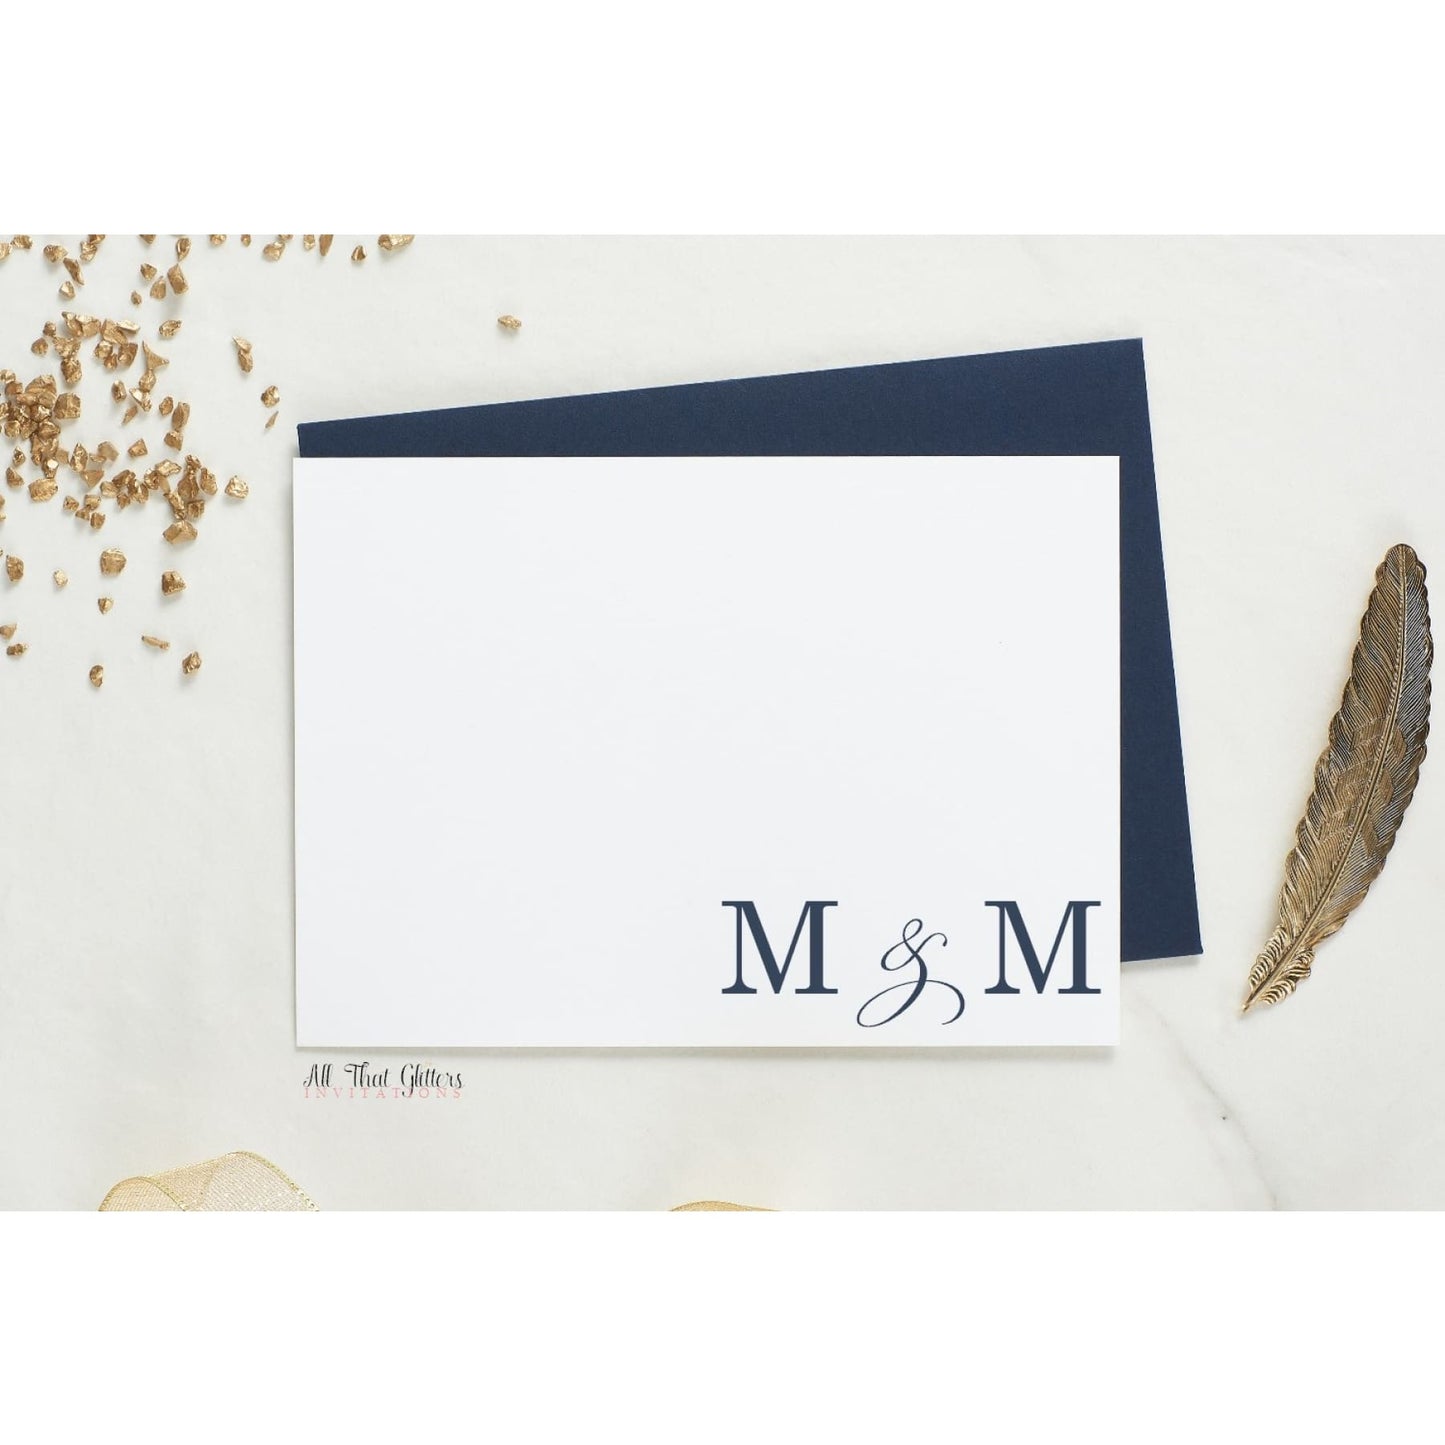 Folded Thank You Card, Melanie Style - All That Glitters Invitations